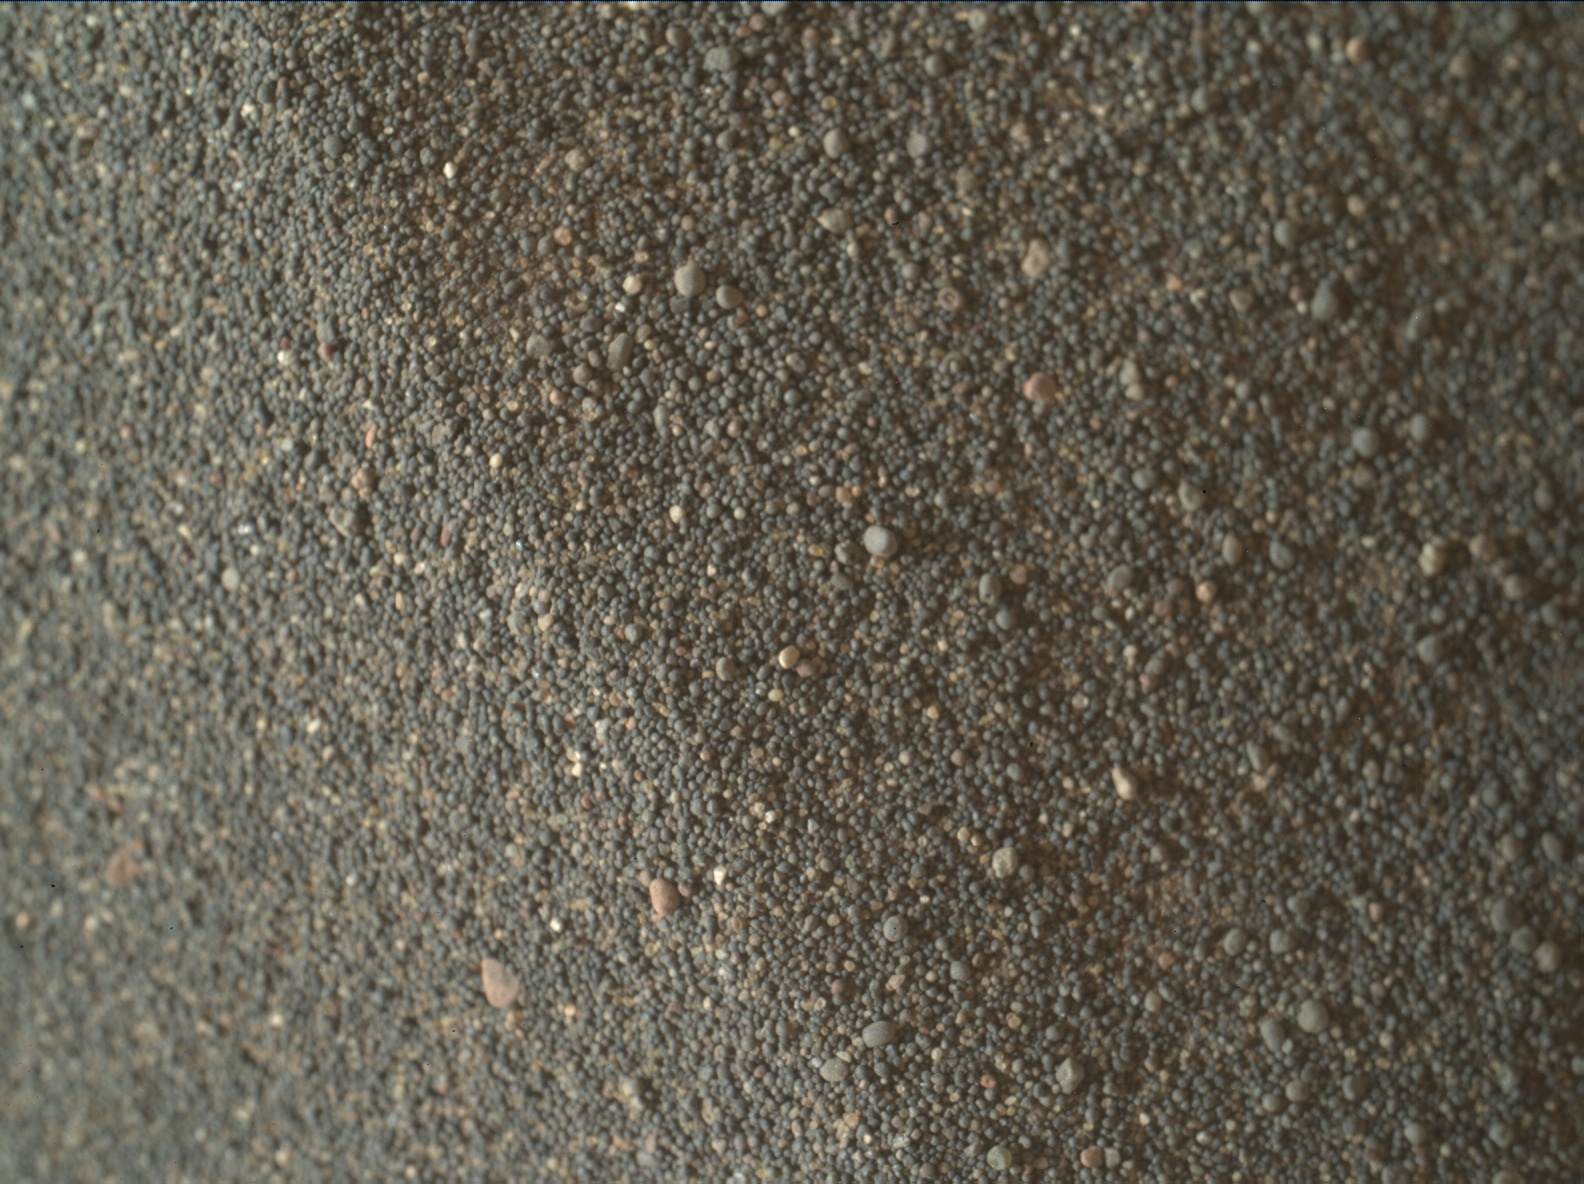 Nasa's Mars rover Curiosity acquired this image using its Mars Hand Lens Imager (MAHLI) on Sol 2992